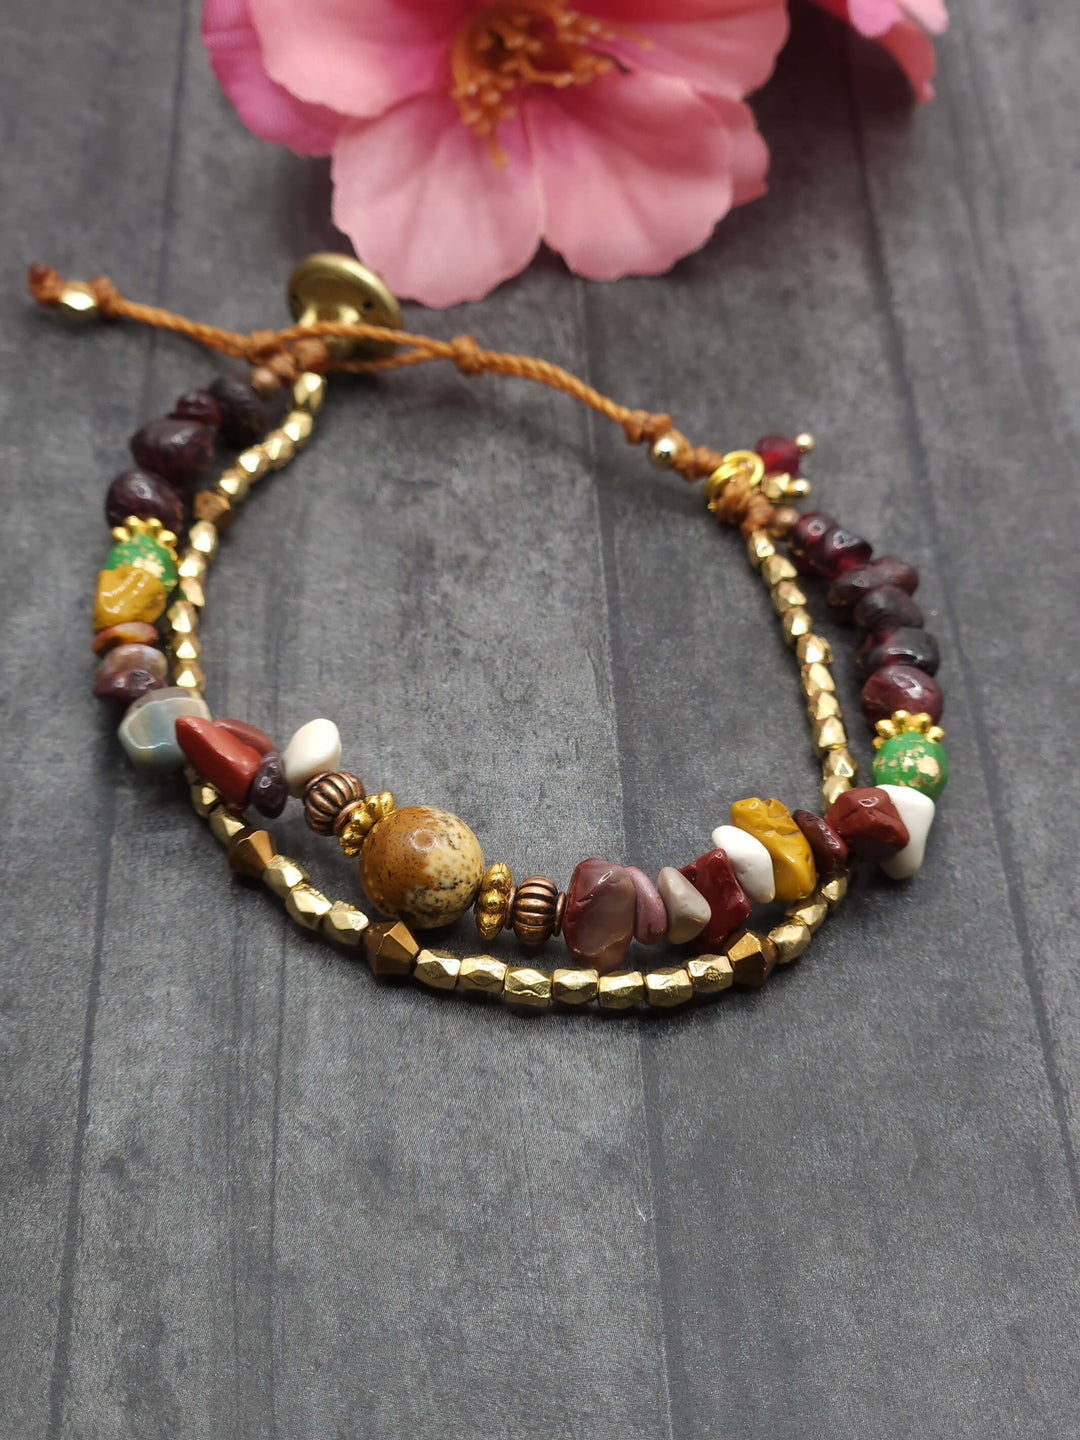 This photo of the Rainbow Mountains Bracelet shows a row of brown, green, white, yellow, red beads varied in a row, with a second row of gold beads.